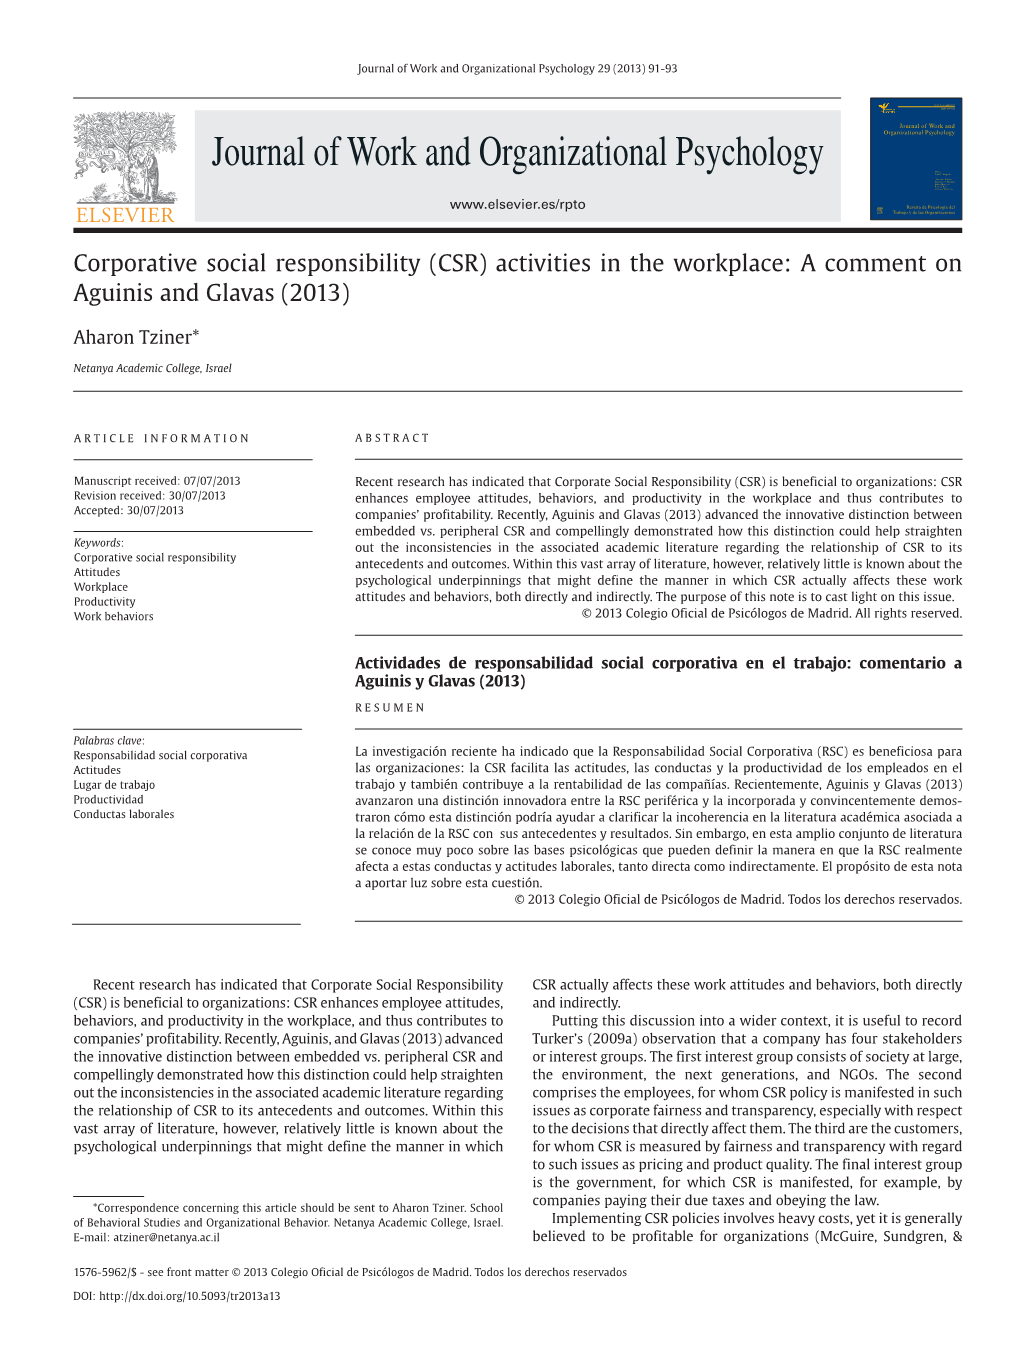 Corporative Social Responsibility (CSR) Activities in the Workplace: a Comment on Aguinis and Glavas (2013)